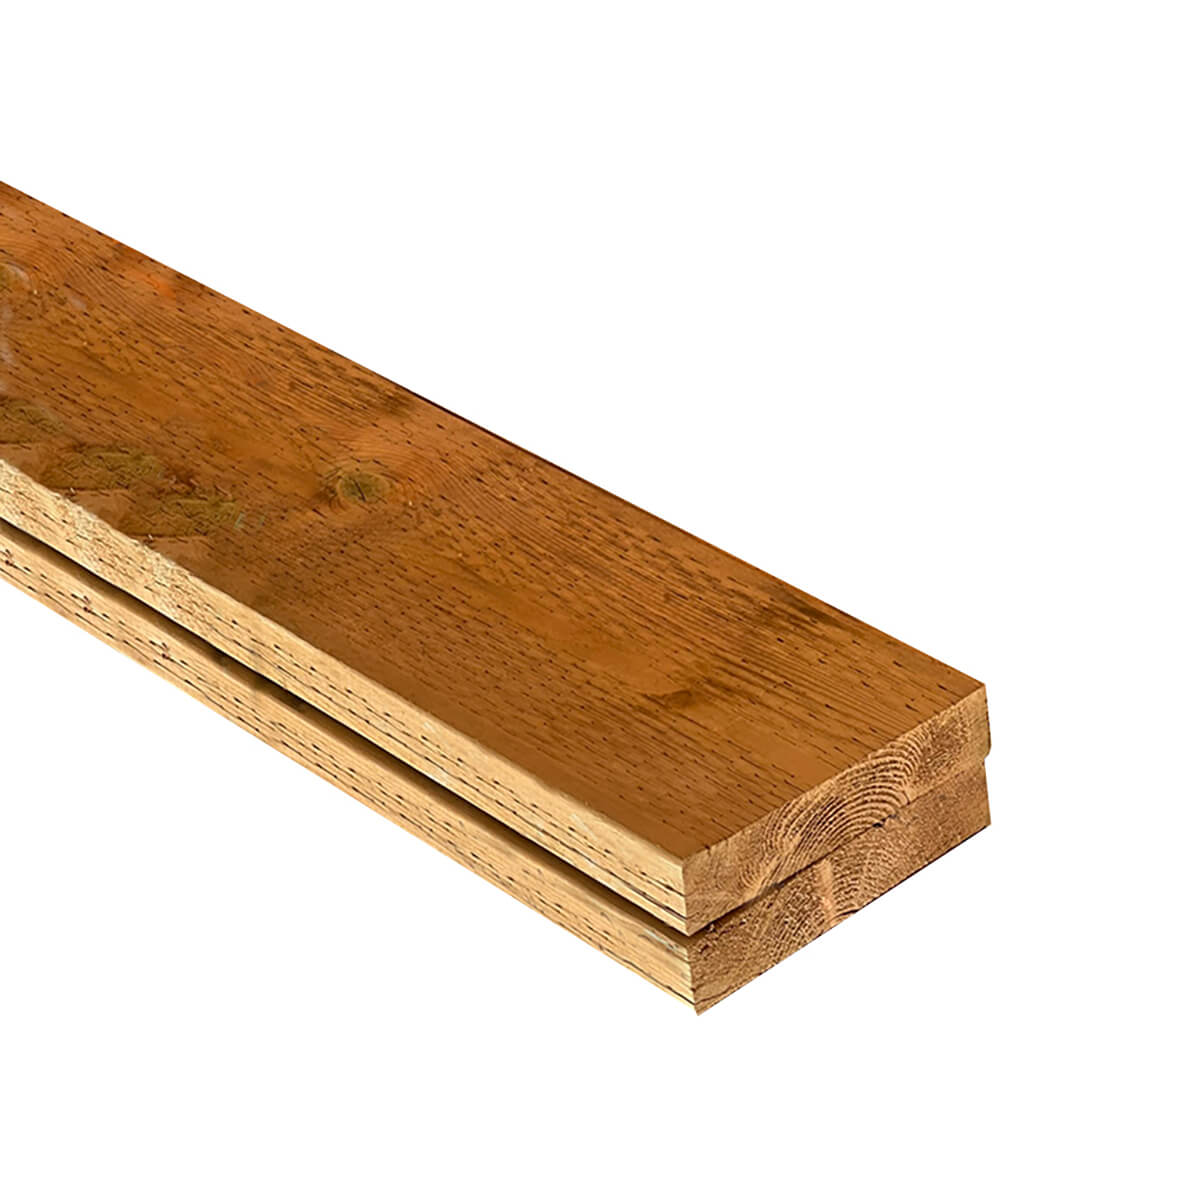 2X8X10-ft - .40 - Pressure Treated Lumber - Ground Contact